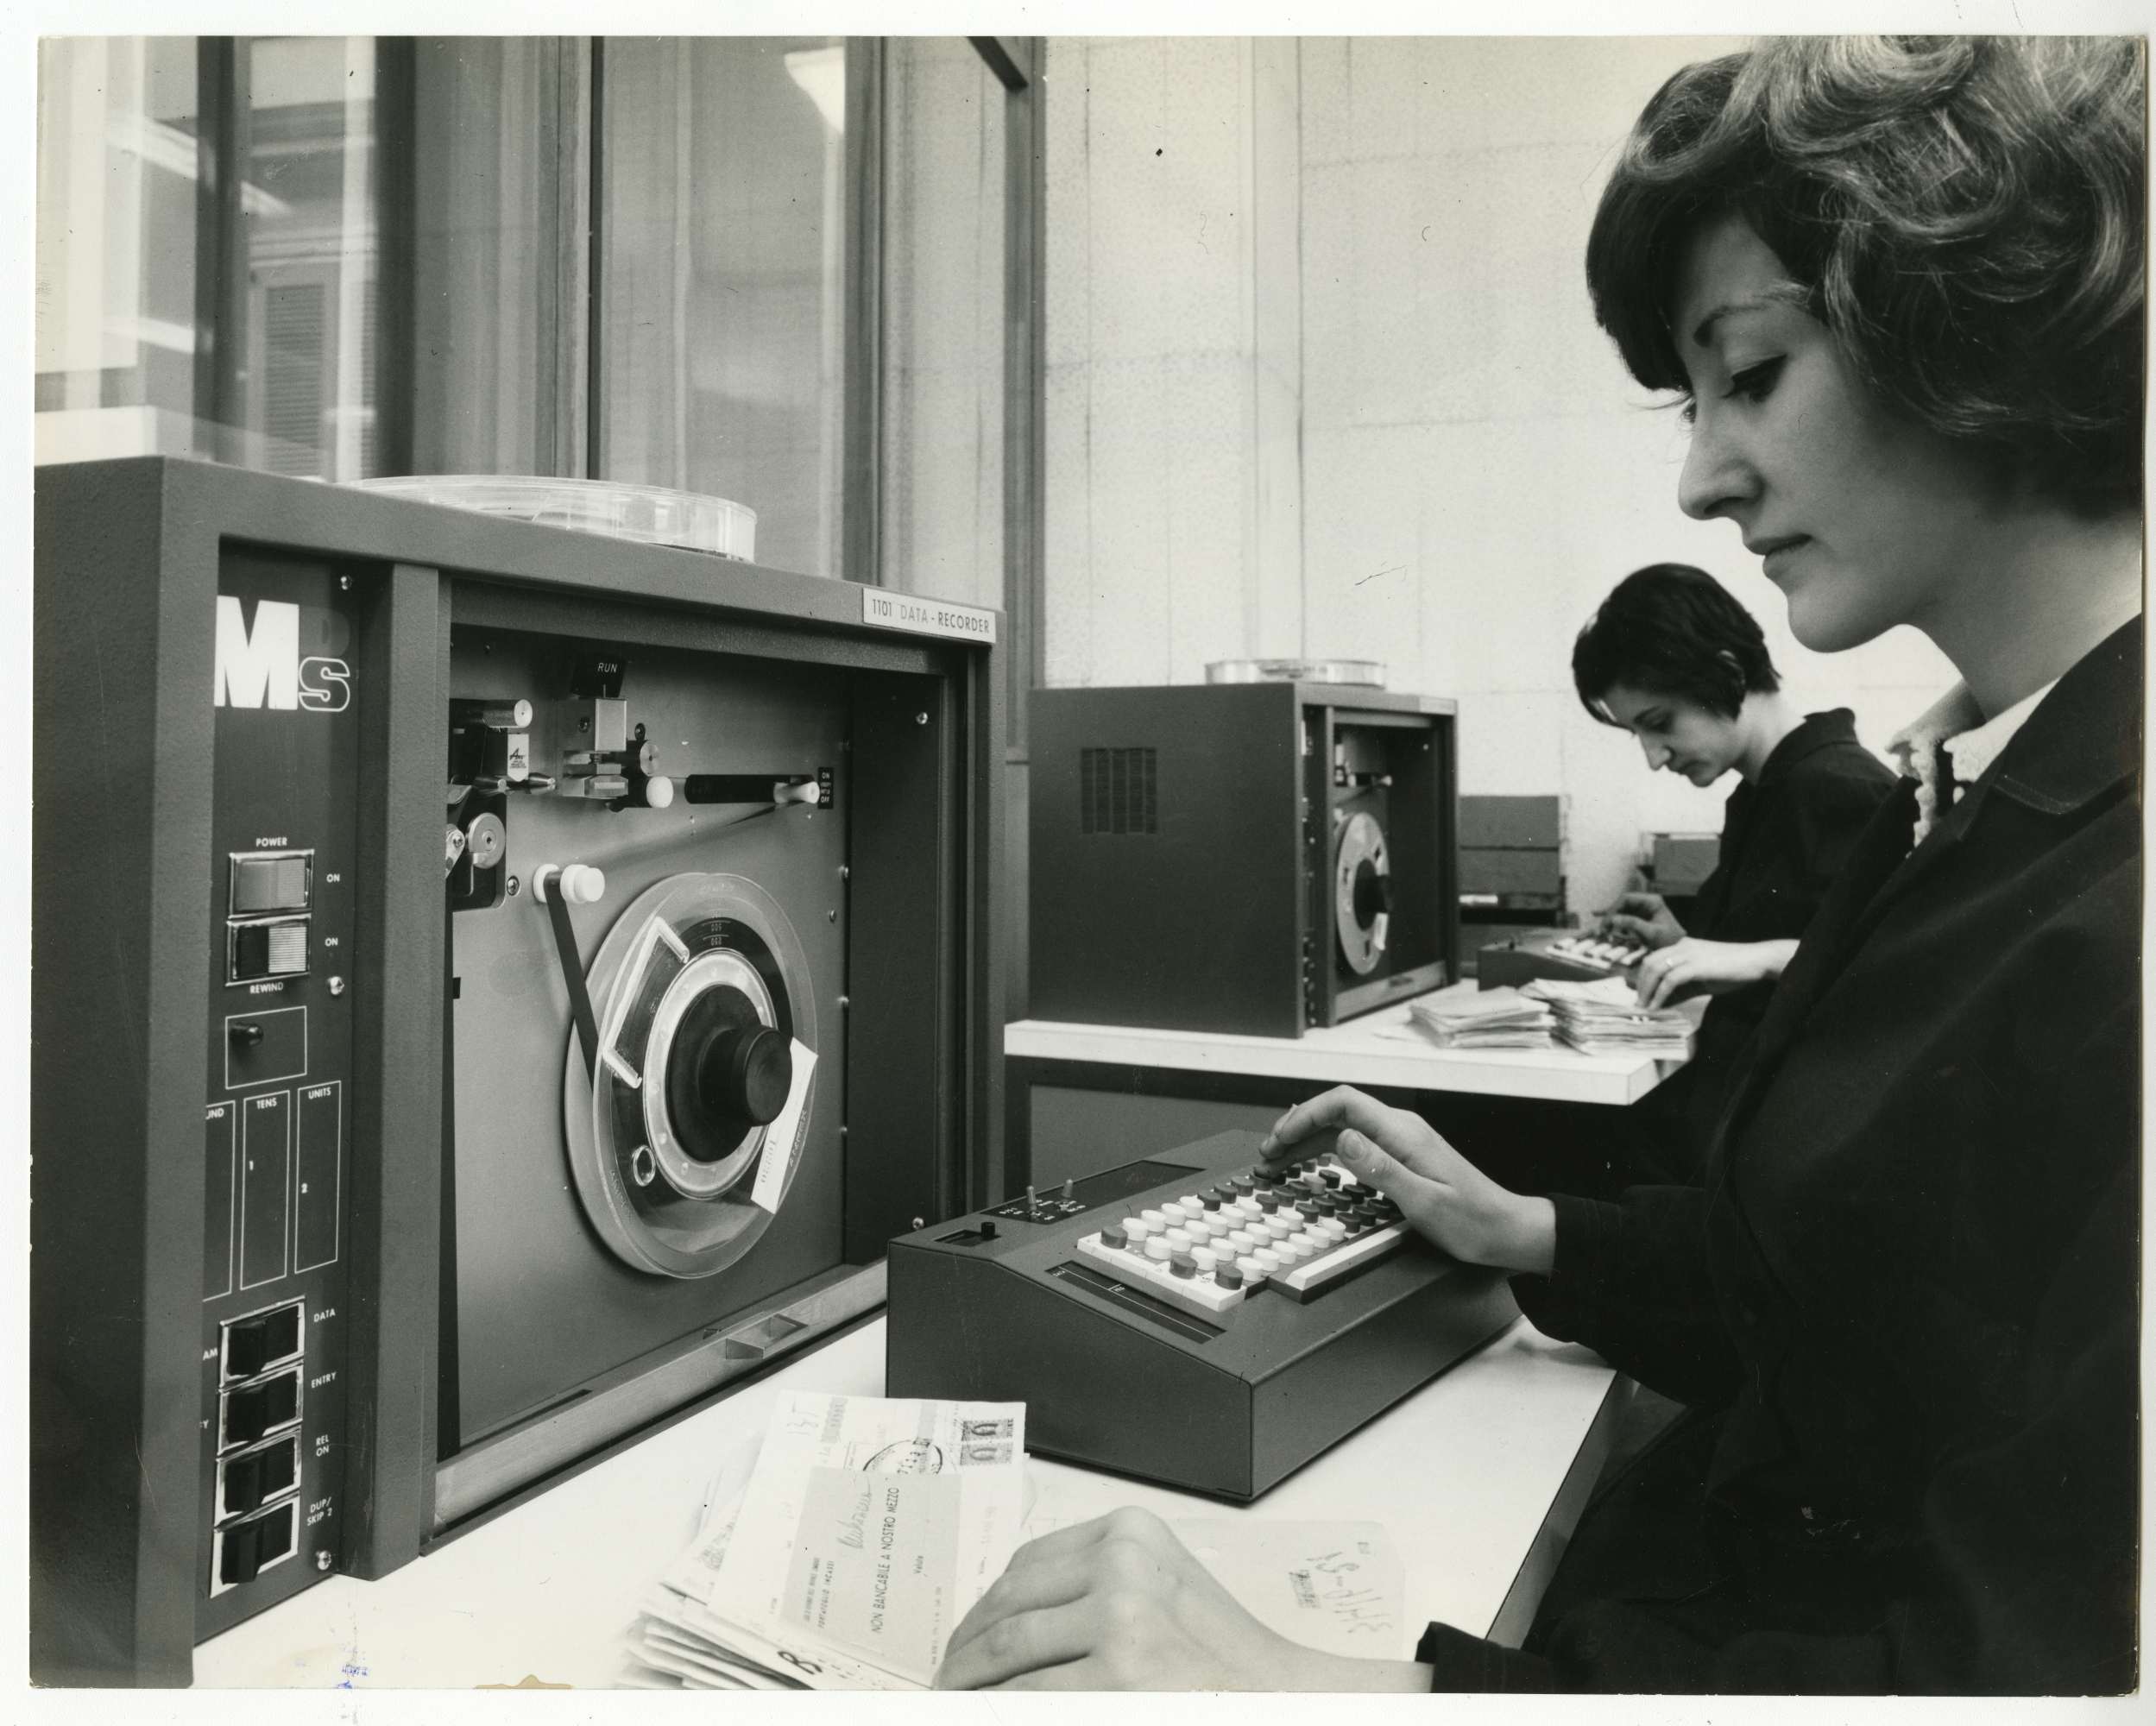 Female employees working on the ‘MDS’ machines for direct recording of data on magnetic tapes at the Cariplo Electronic Centre, 1969